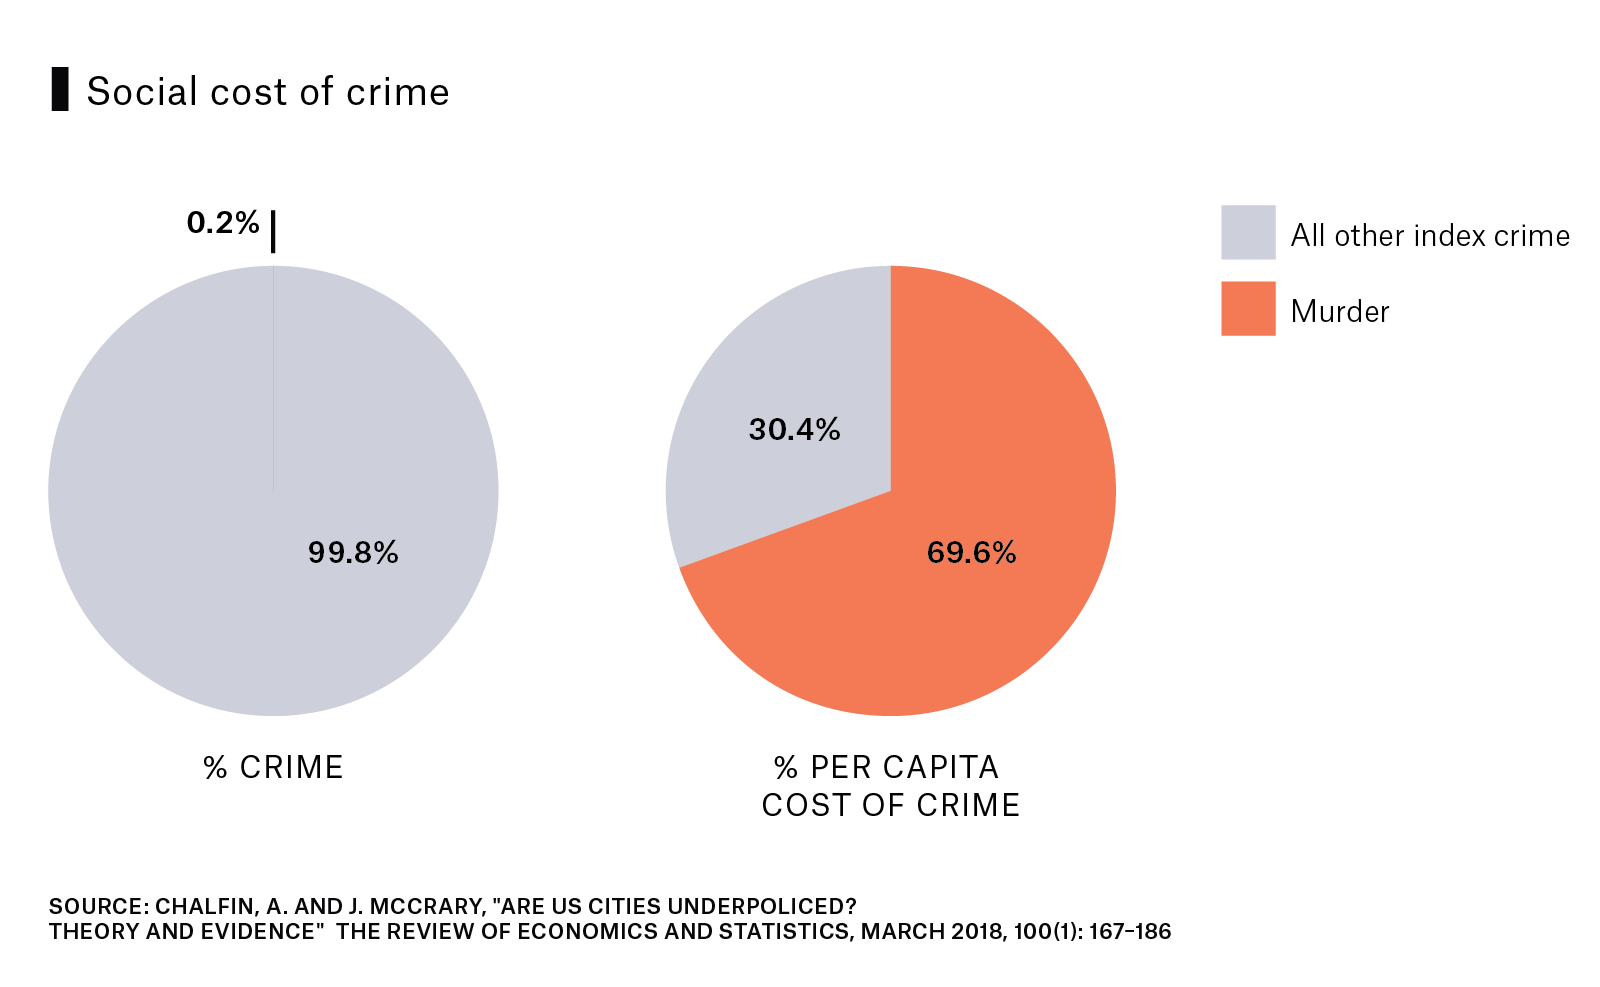 2 side-by-side pie charts compare the social cost of crime for murder versus all other index crime. Murder makes up 0.2% of all crime, but has a percent per capita cost of crime at 69.6%. 